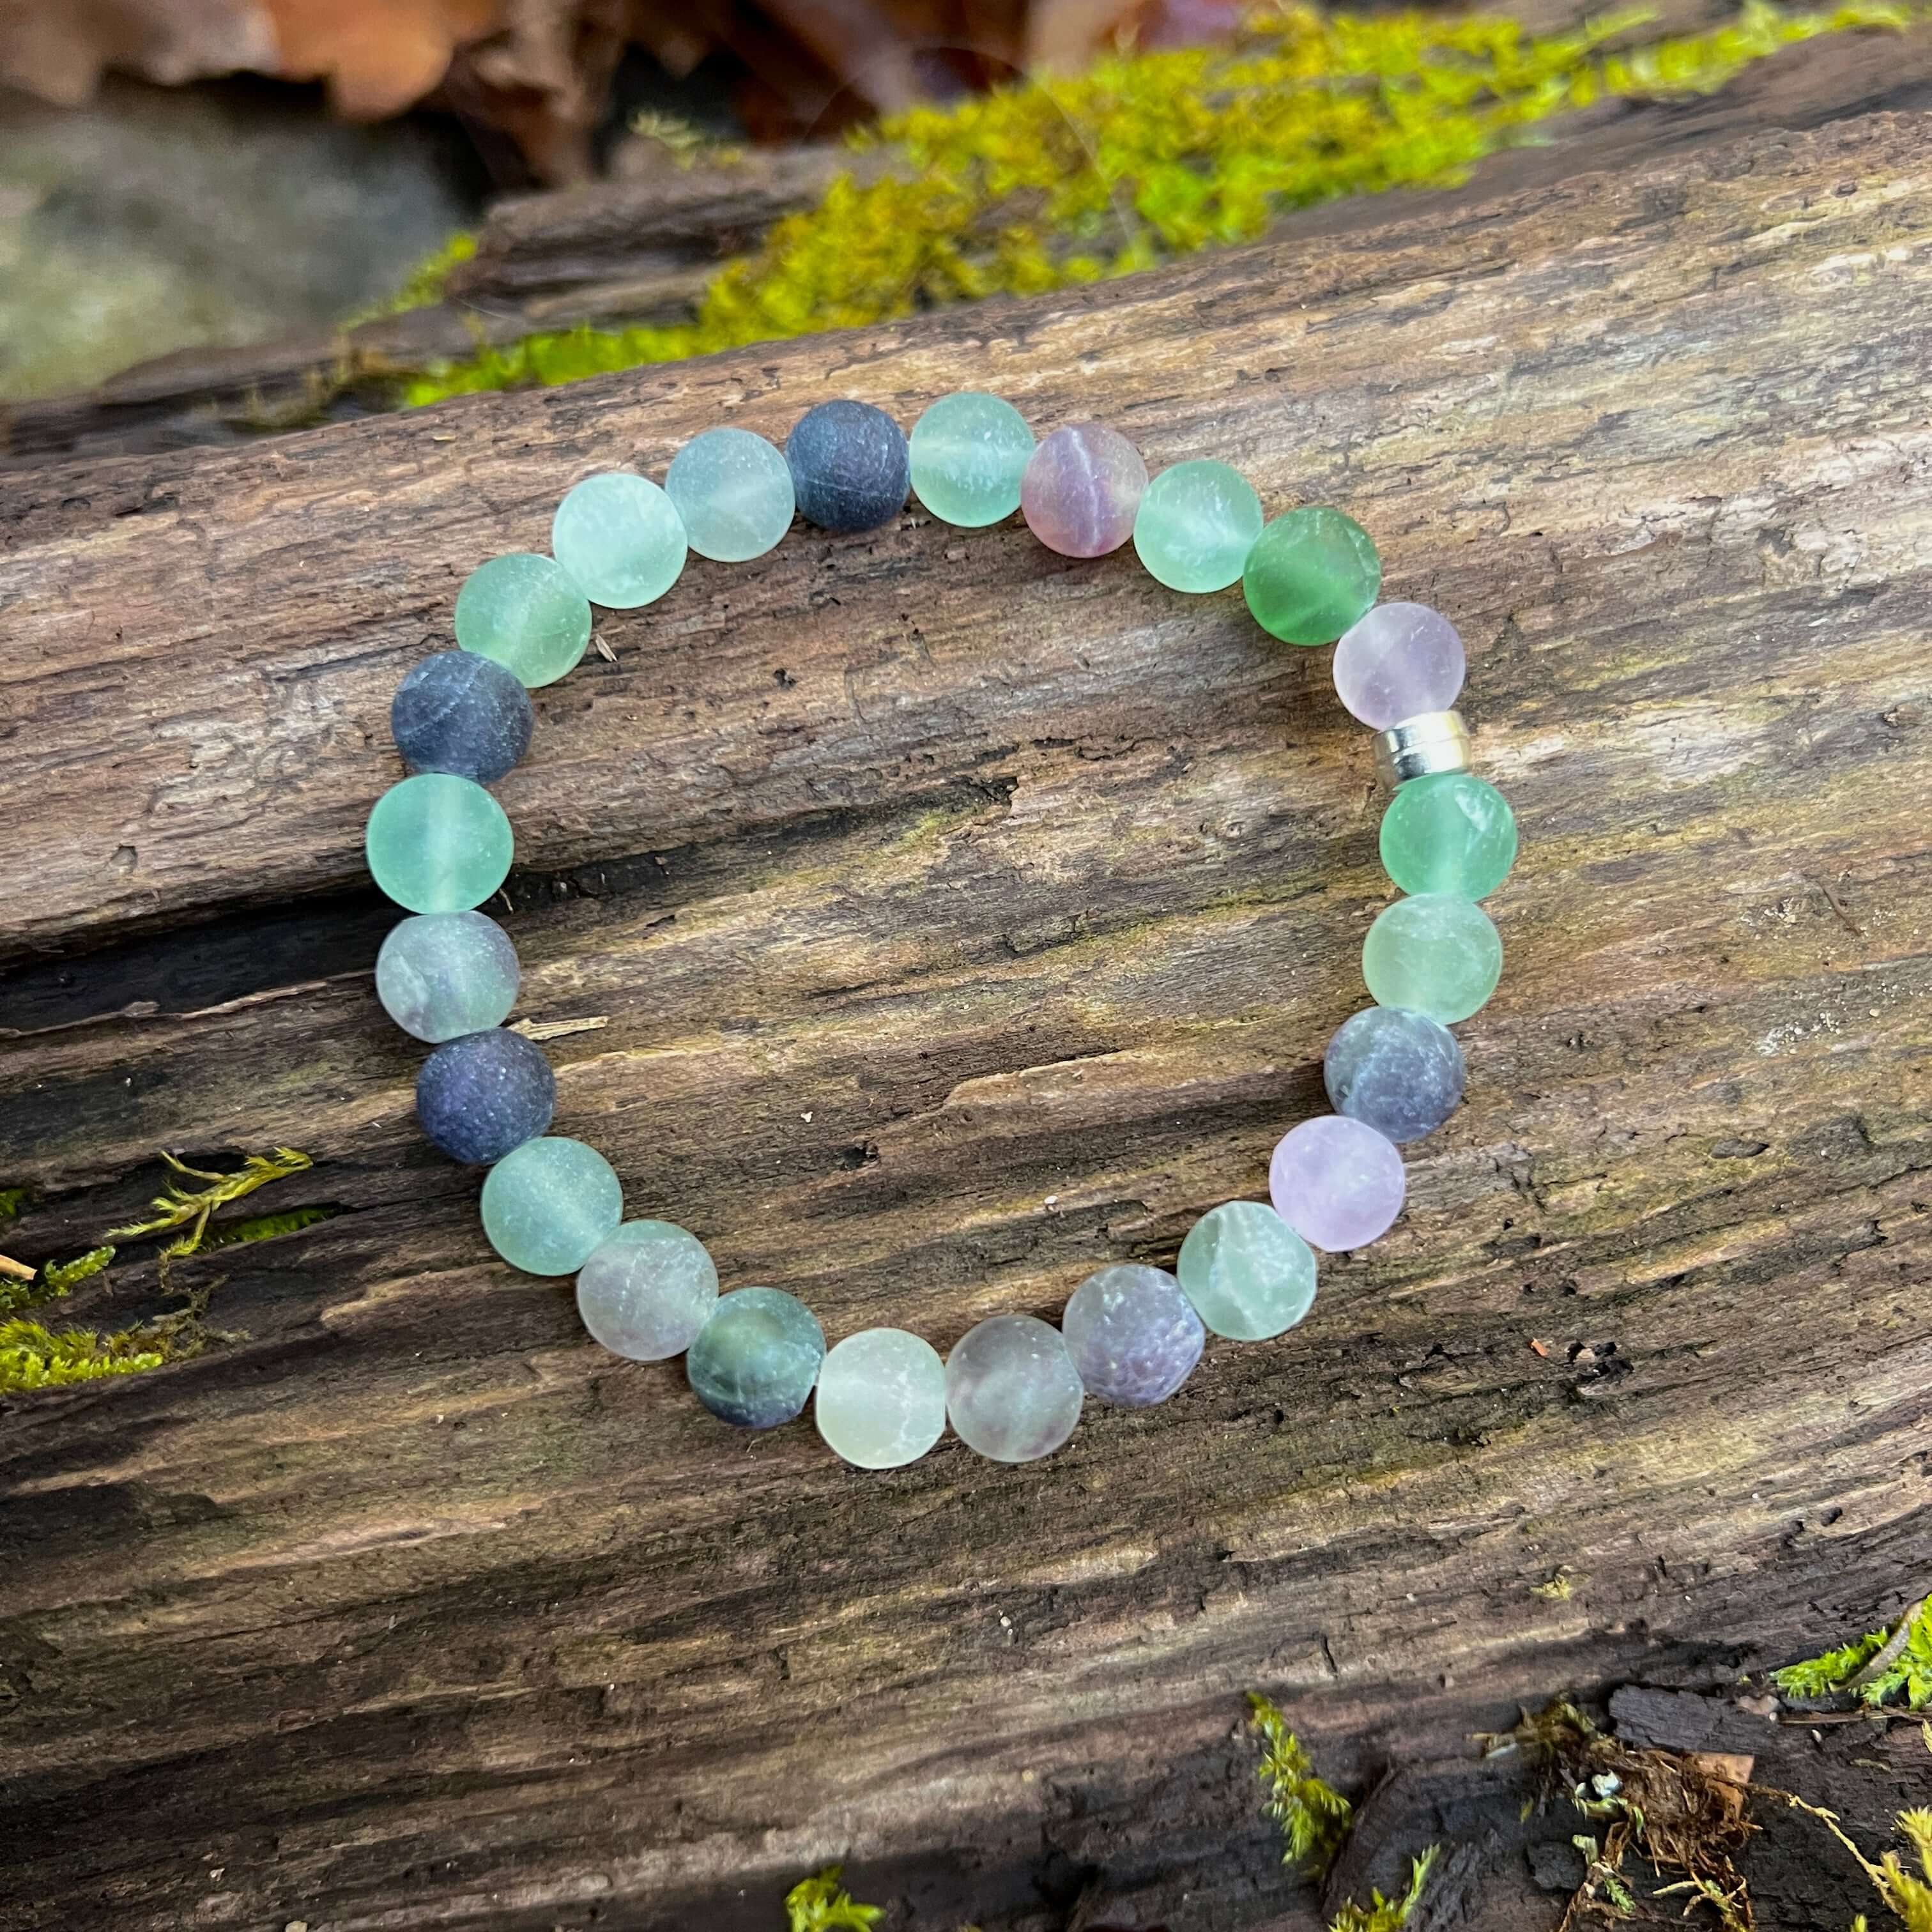 Fluorite Frosted Bead Bracelet This bracelet is made with high-quality Frosted Fluorite stones which bring intuition and stability to the wearer. Zodiac Sign: Capricorn. Chakra: Heart. Handmade with authentic crystals and gemstones in Minneapolis, MN.